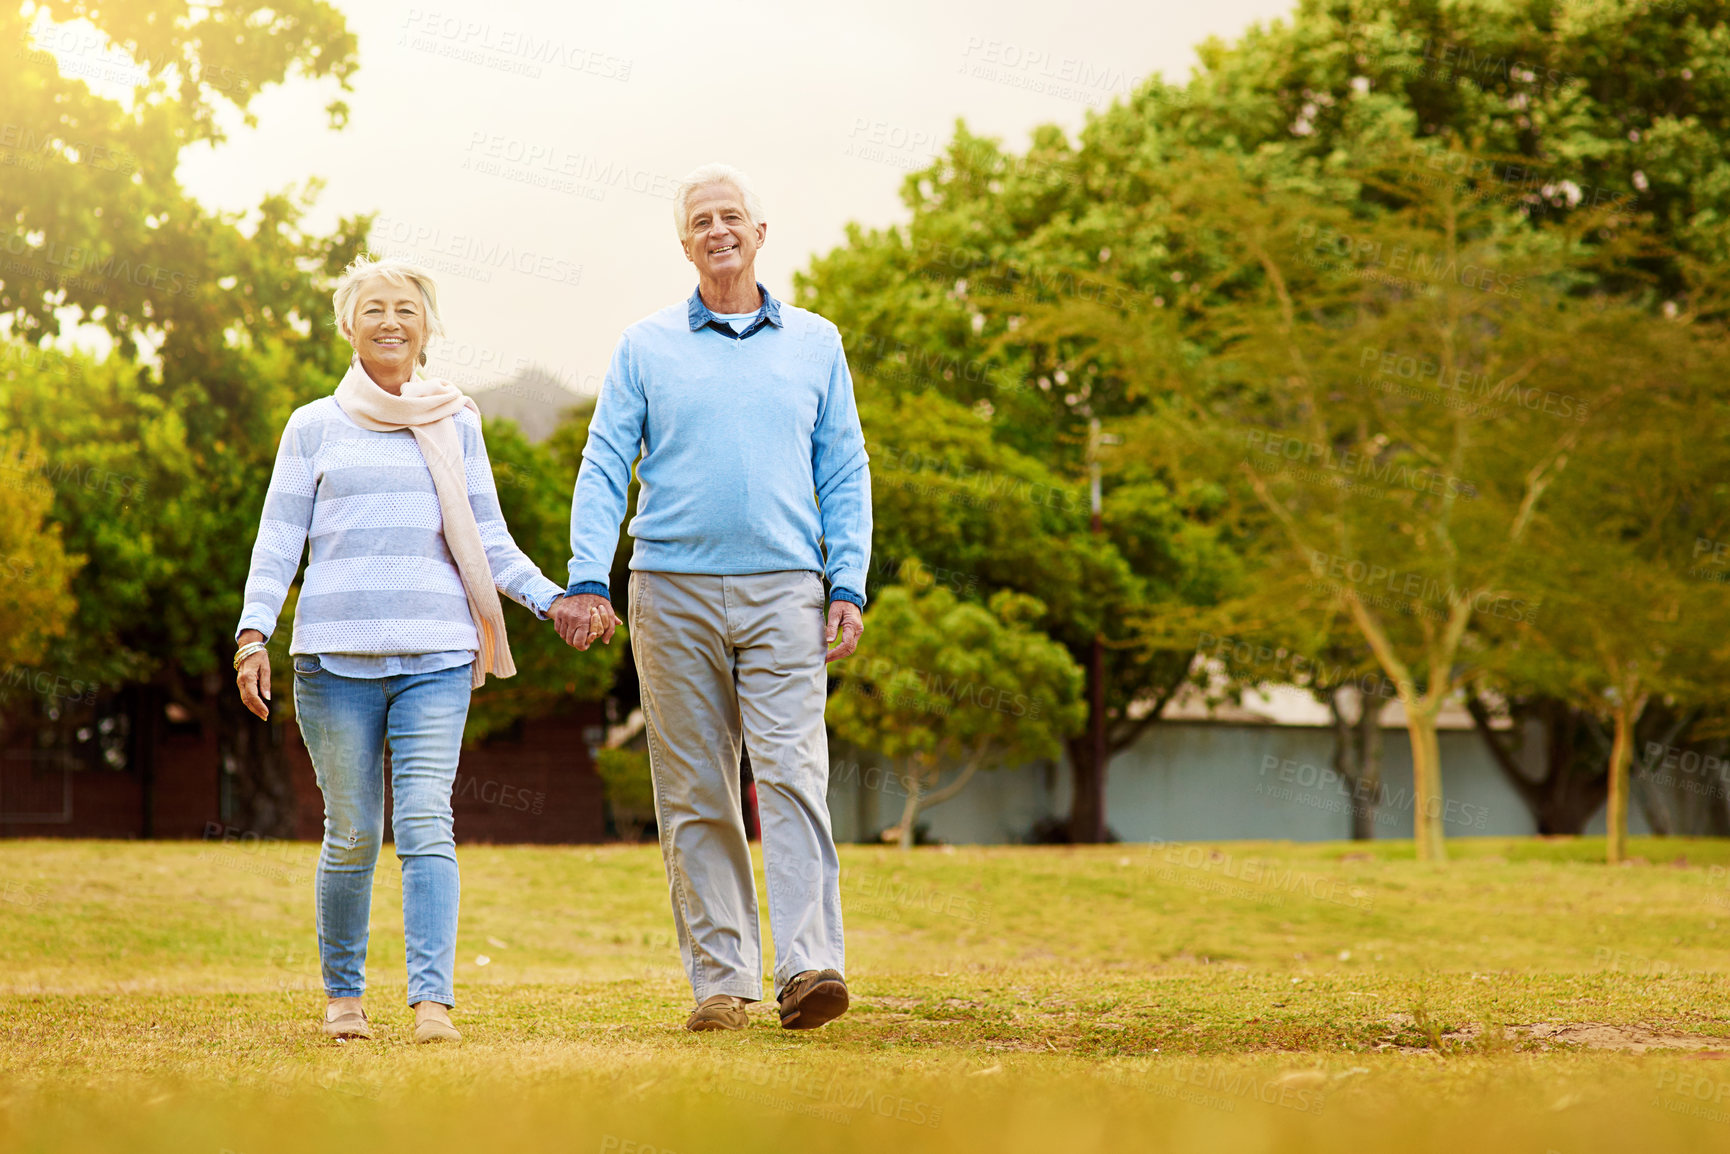 Buy stock photo Portrait of a senior couple enjoying a walk together in a park